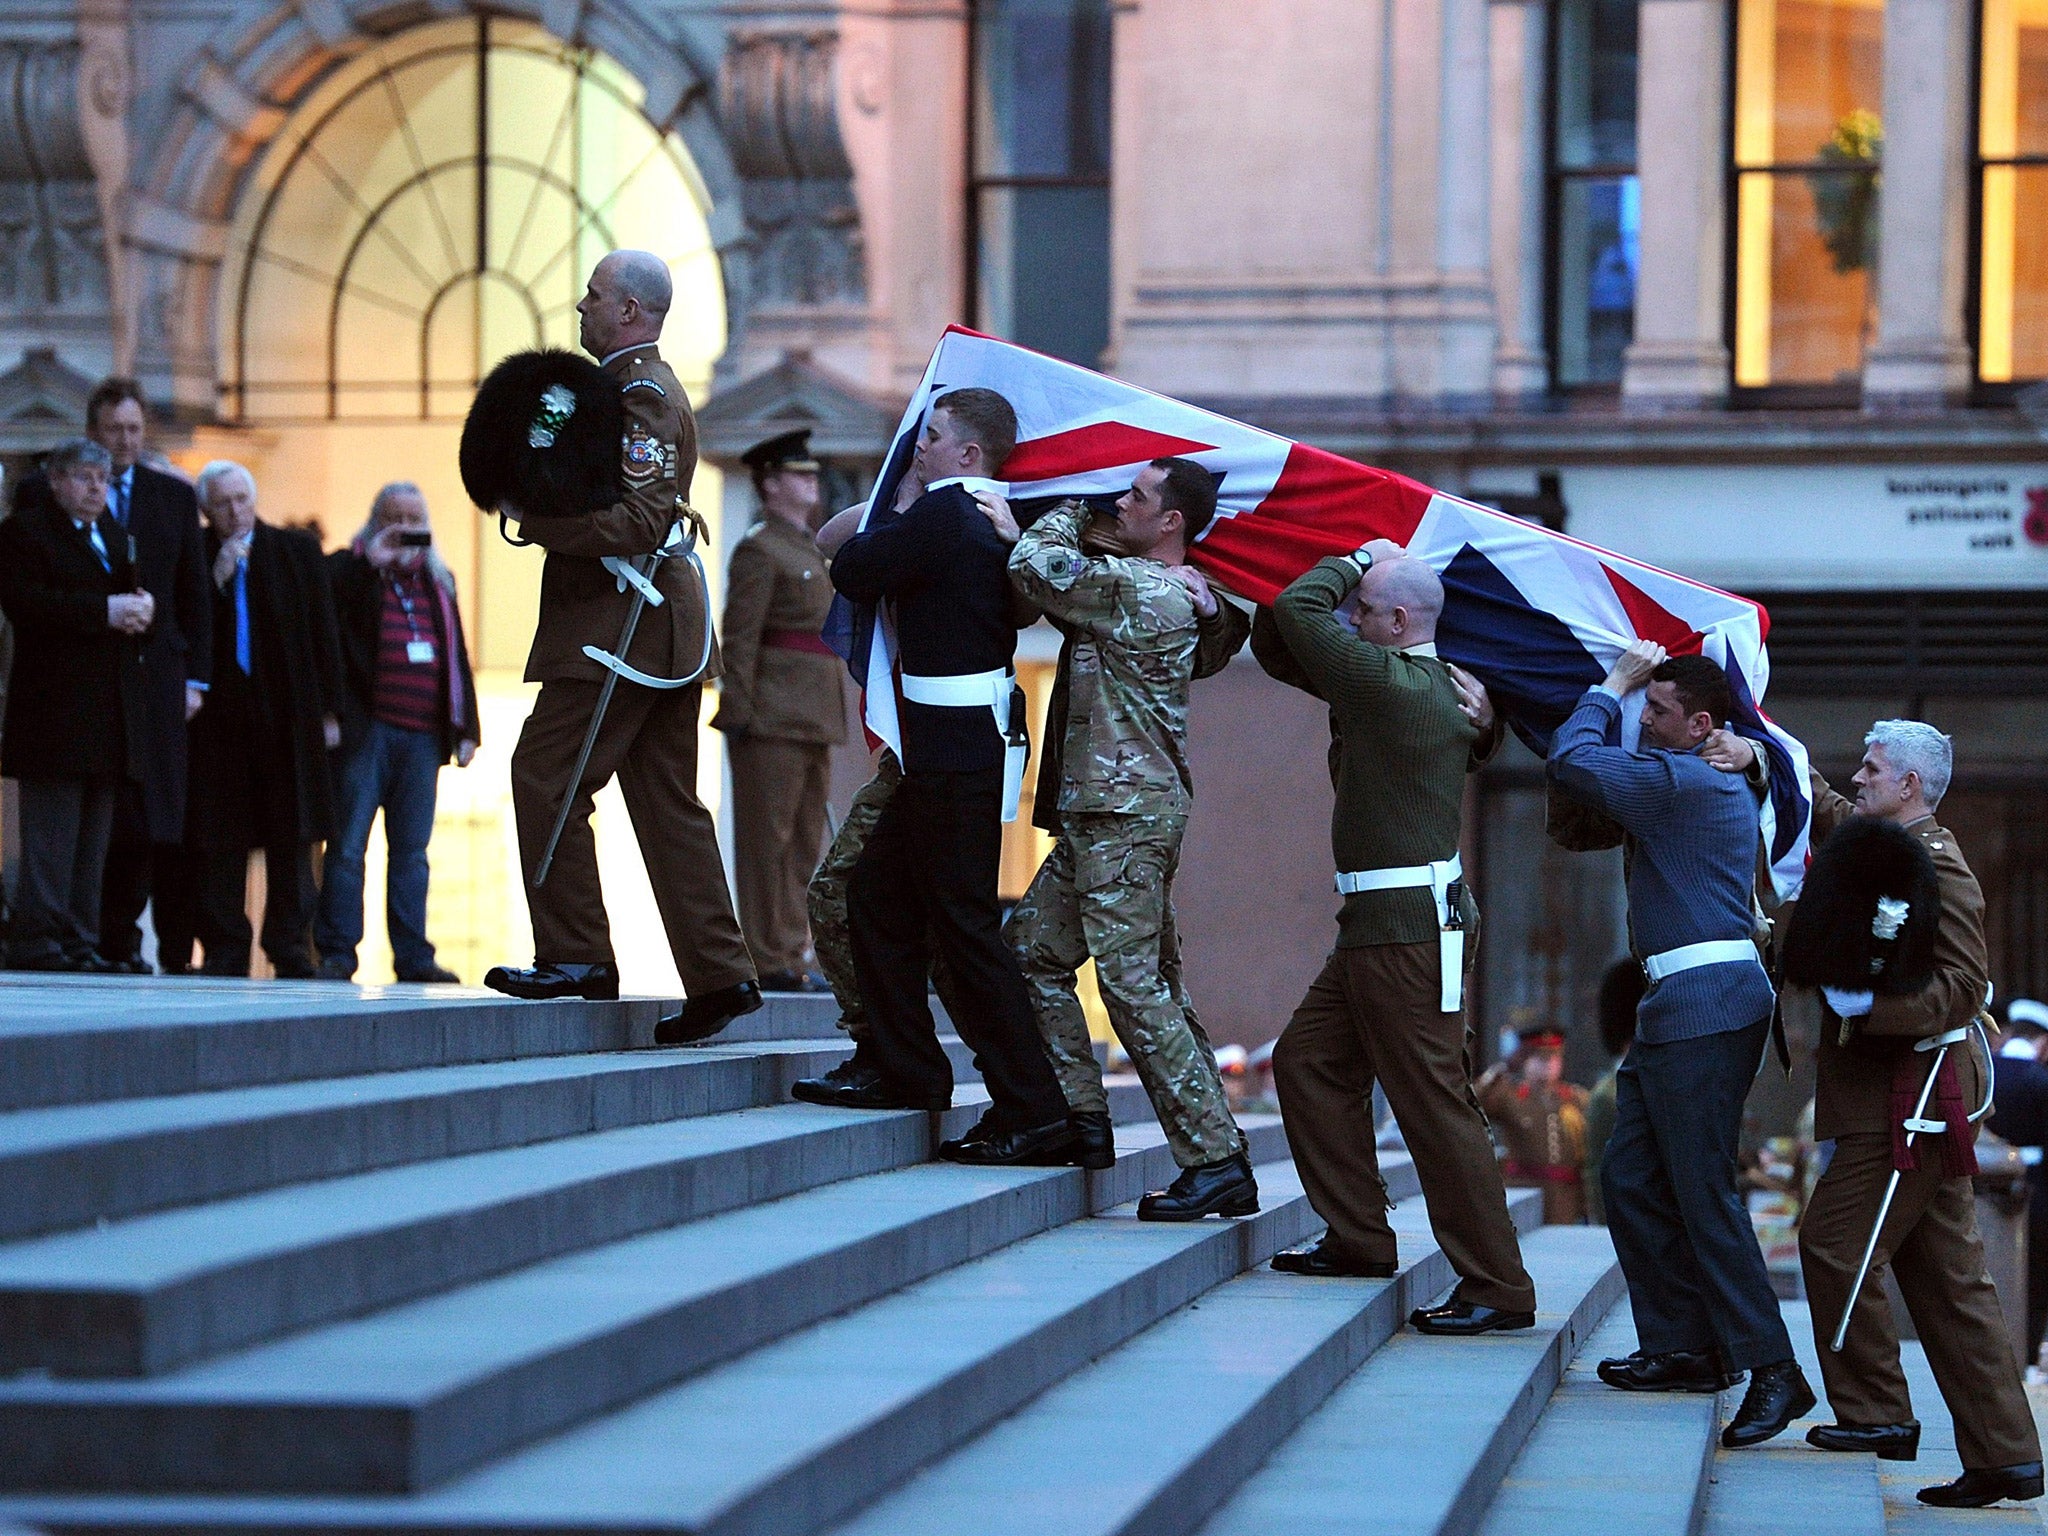 A coffin is carried up the steps of St Paul's Cathedral during a rehearsal for the funeral of former Prime Minister Margaret Thatcher